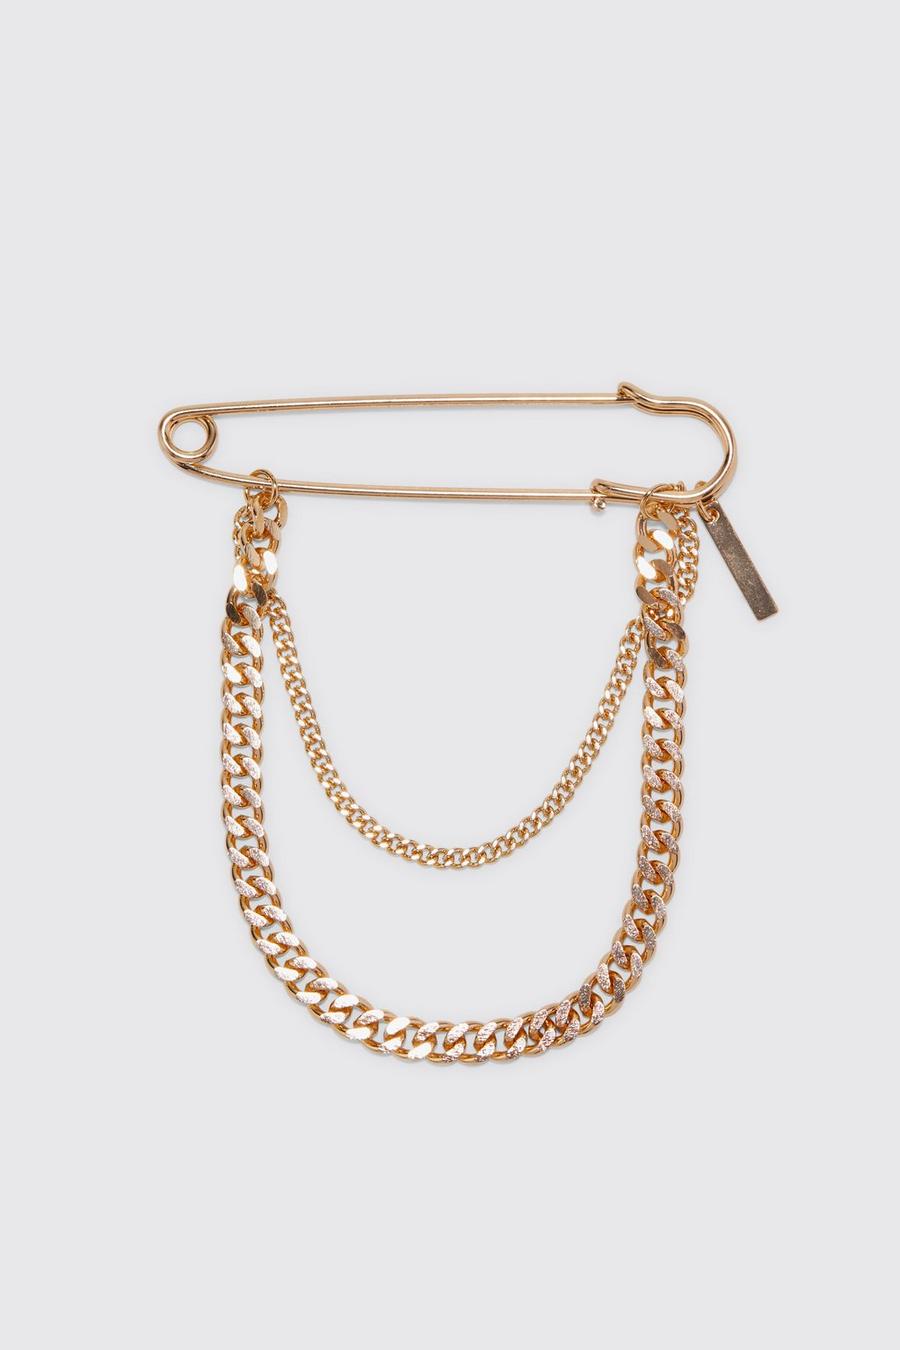 Gold métallique Safety Pin Chain Suit Brooch